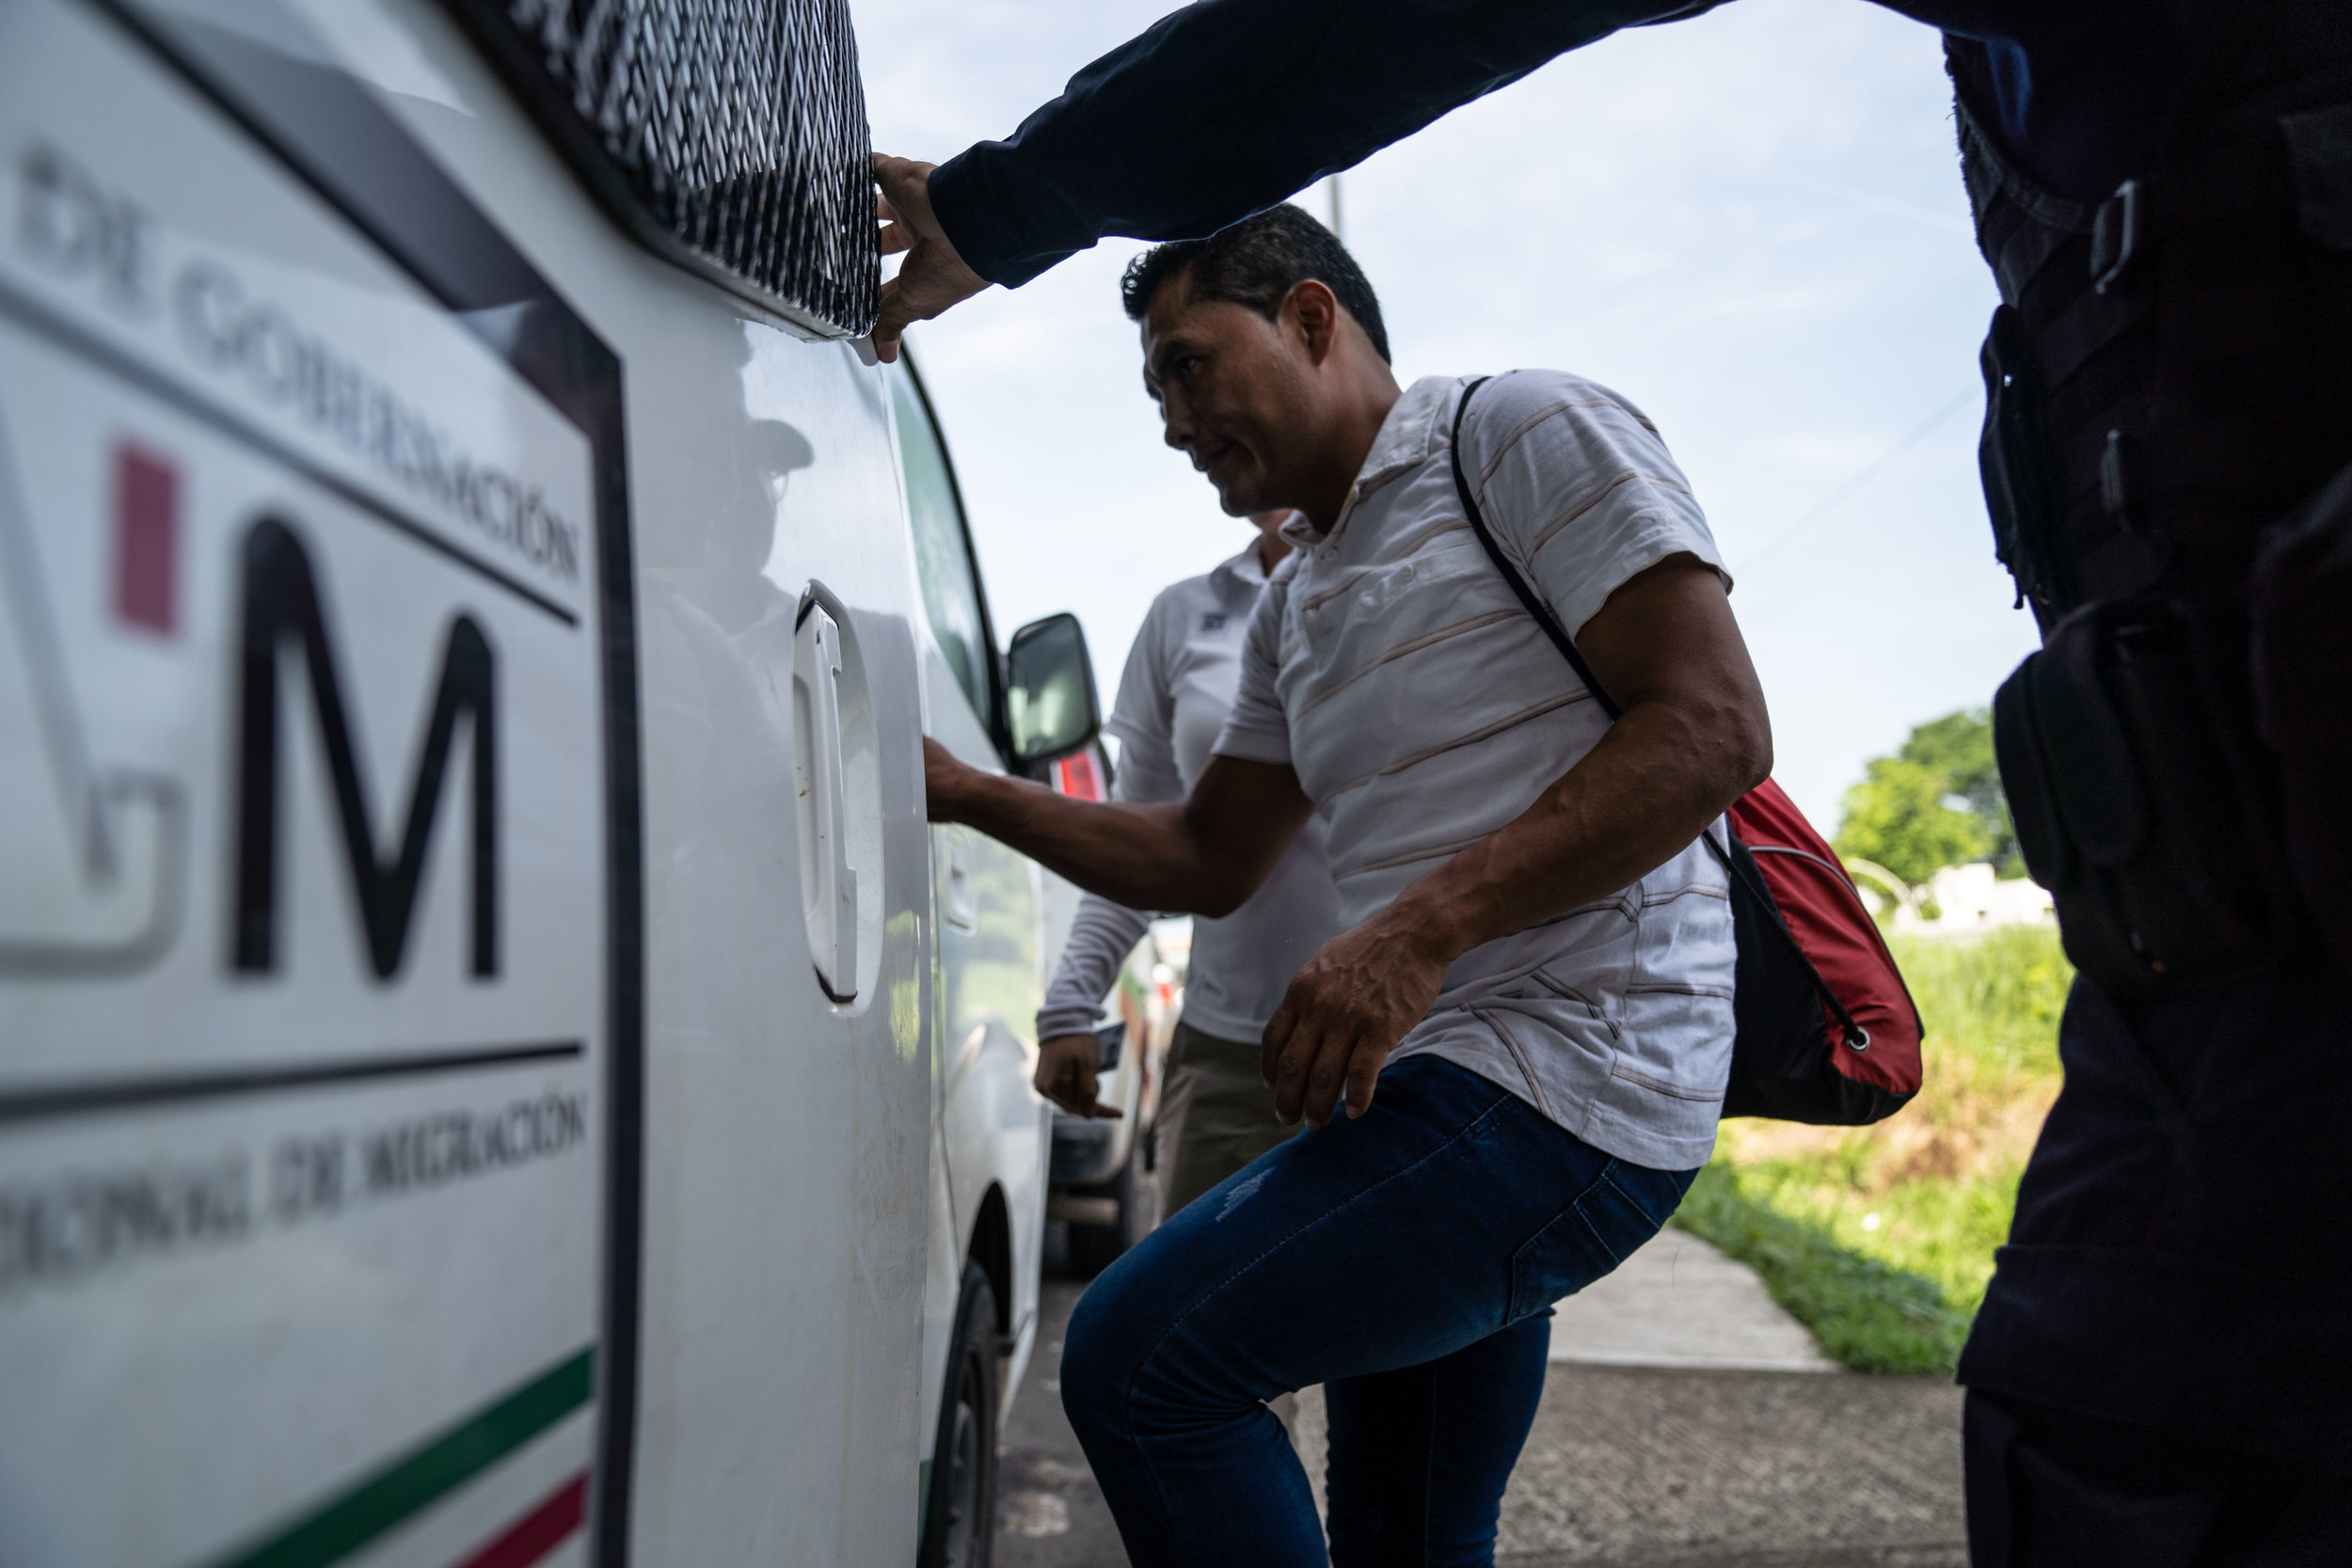   An undocumented migrant is detained at a checkpoint in Tapachula, Mexico in June, 2019.  